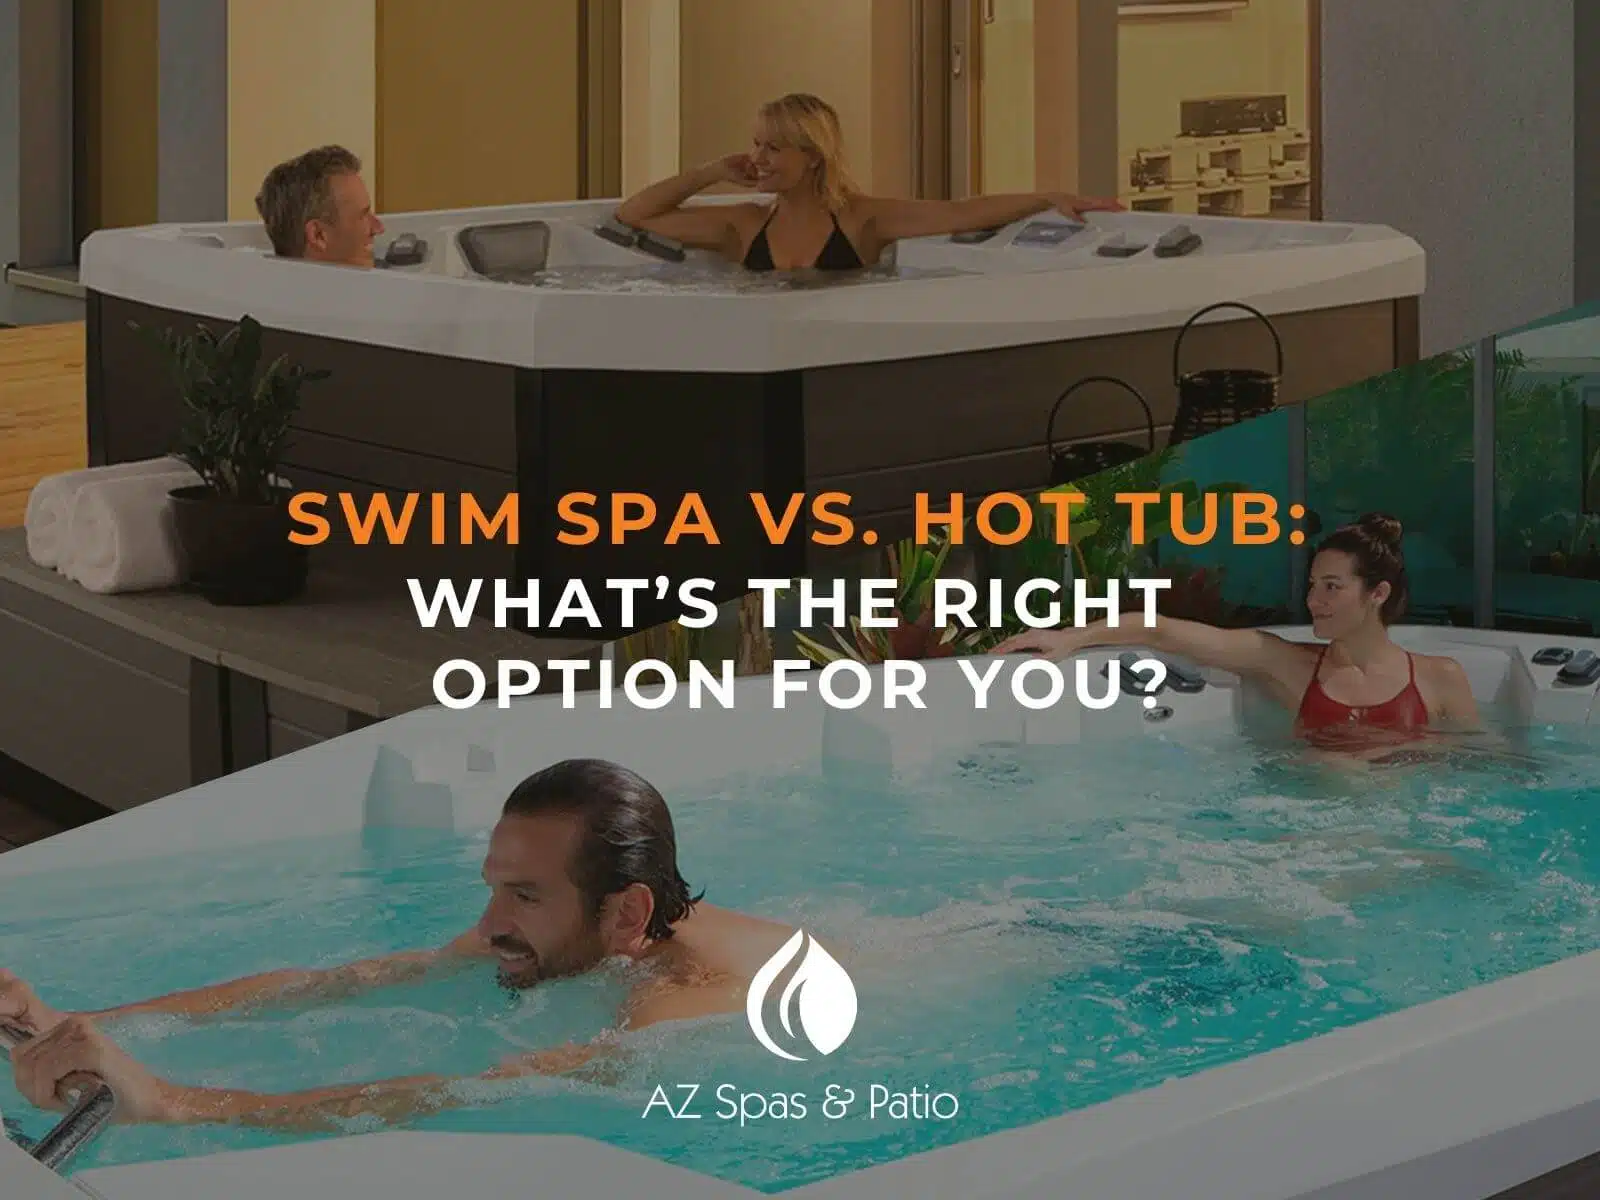 Swim Spa vs. Hot Tub: What’s the Right Option for You?